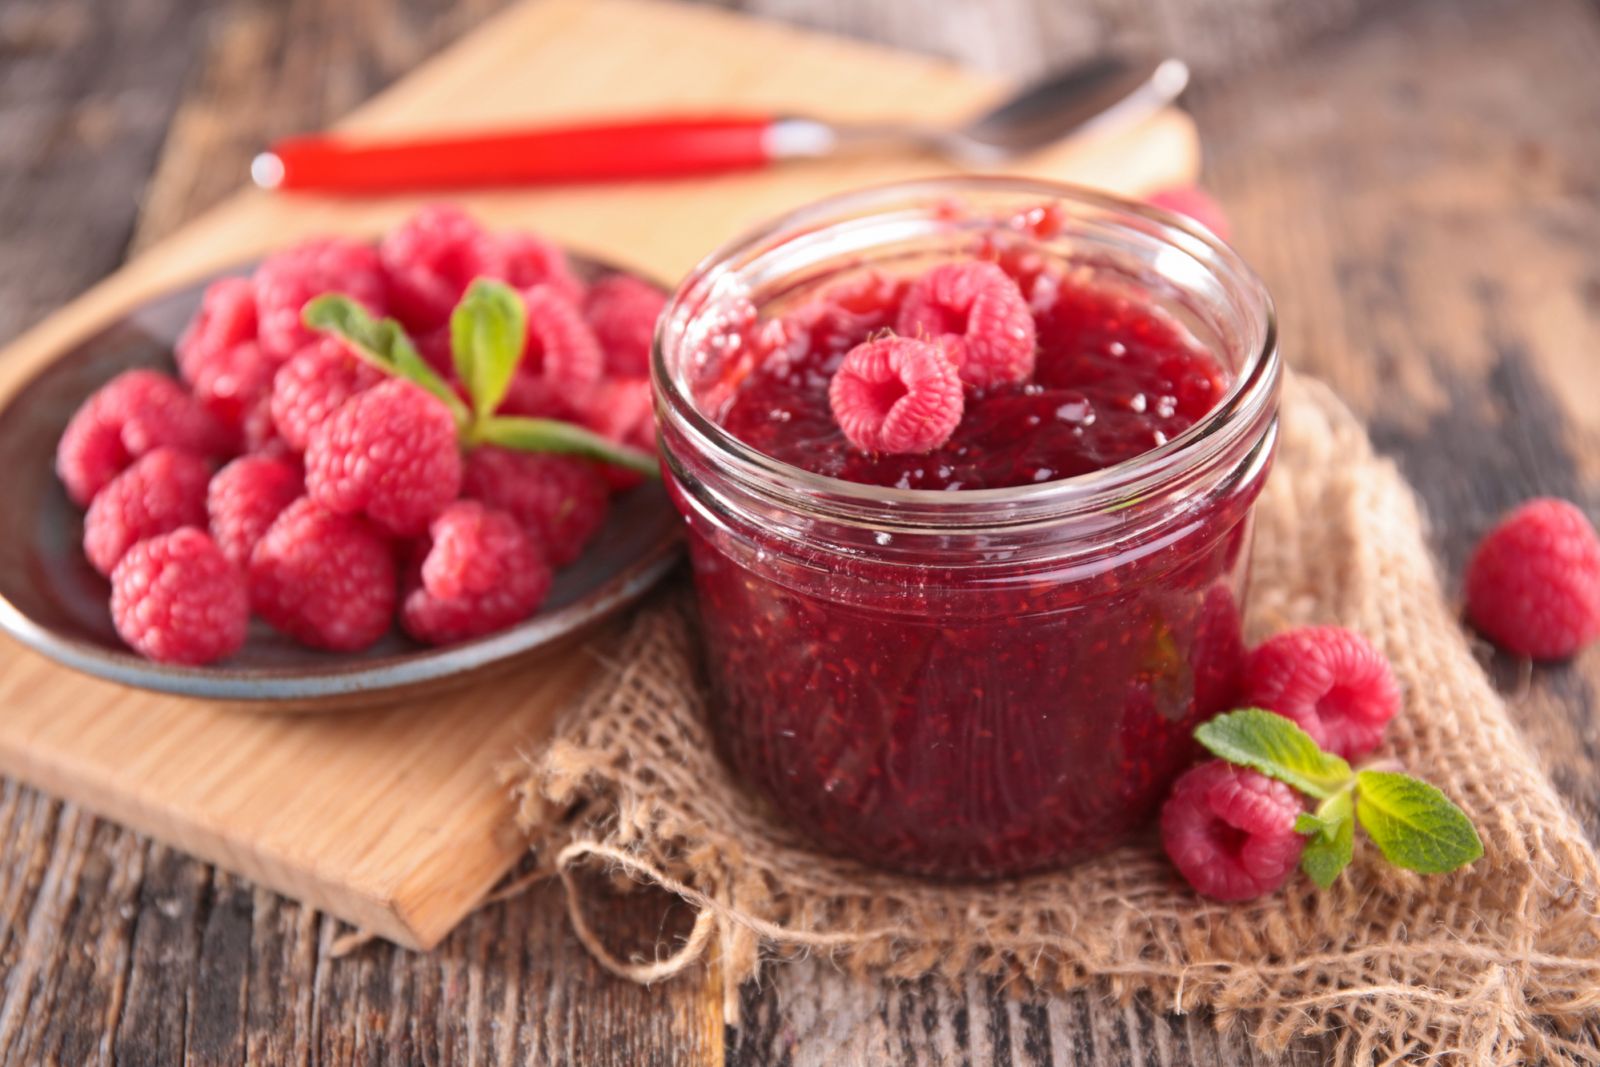 Jam with Confiture